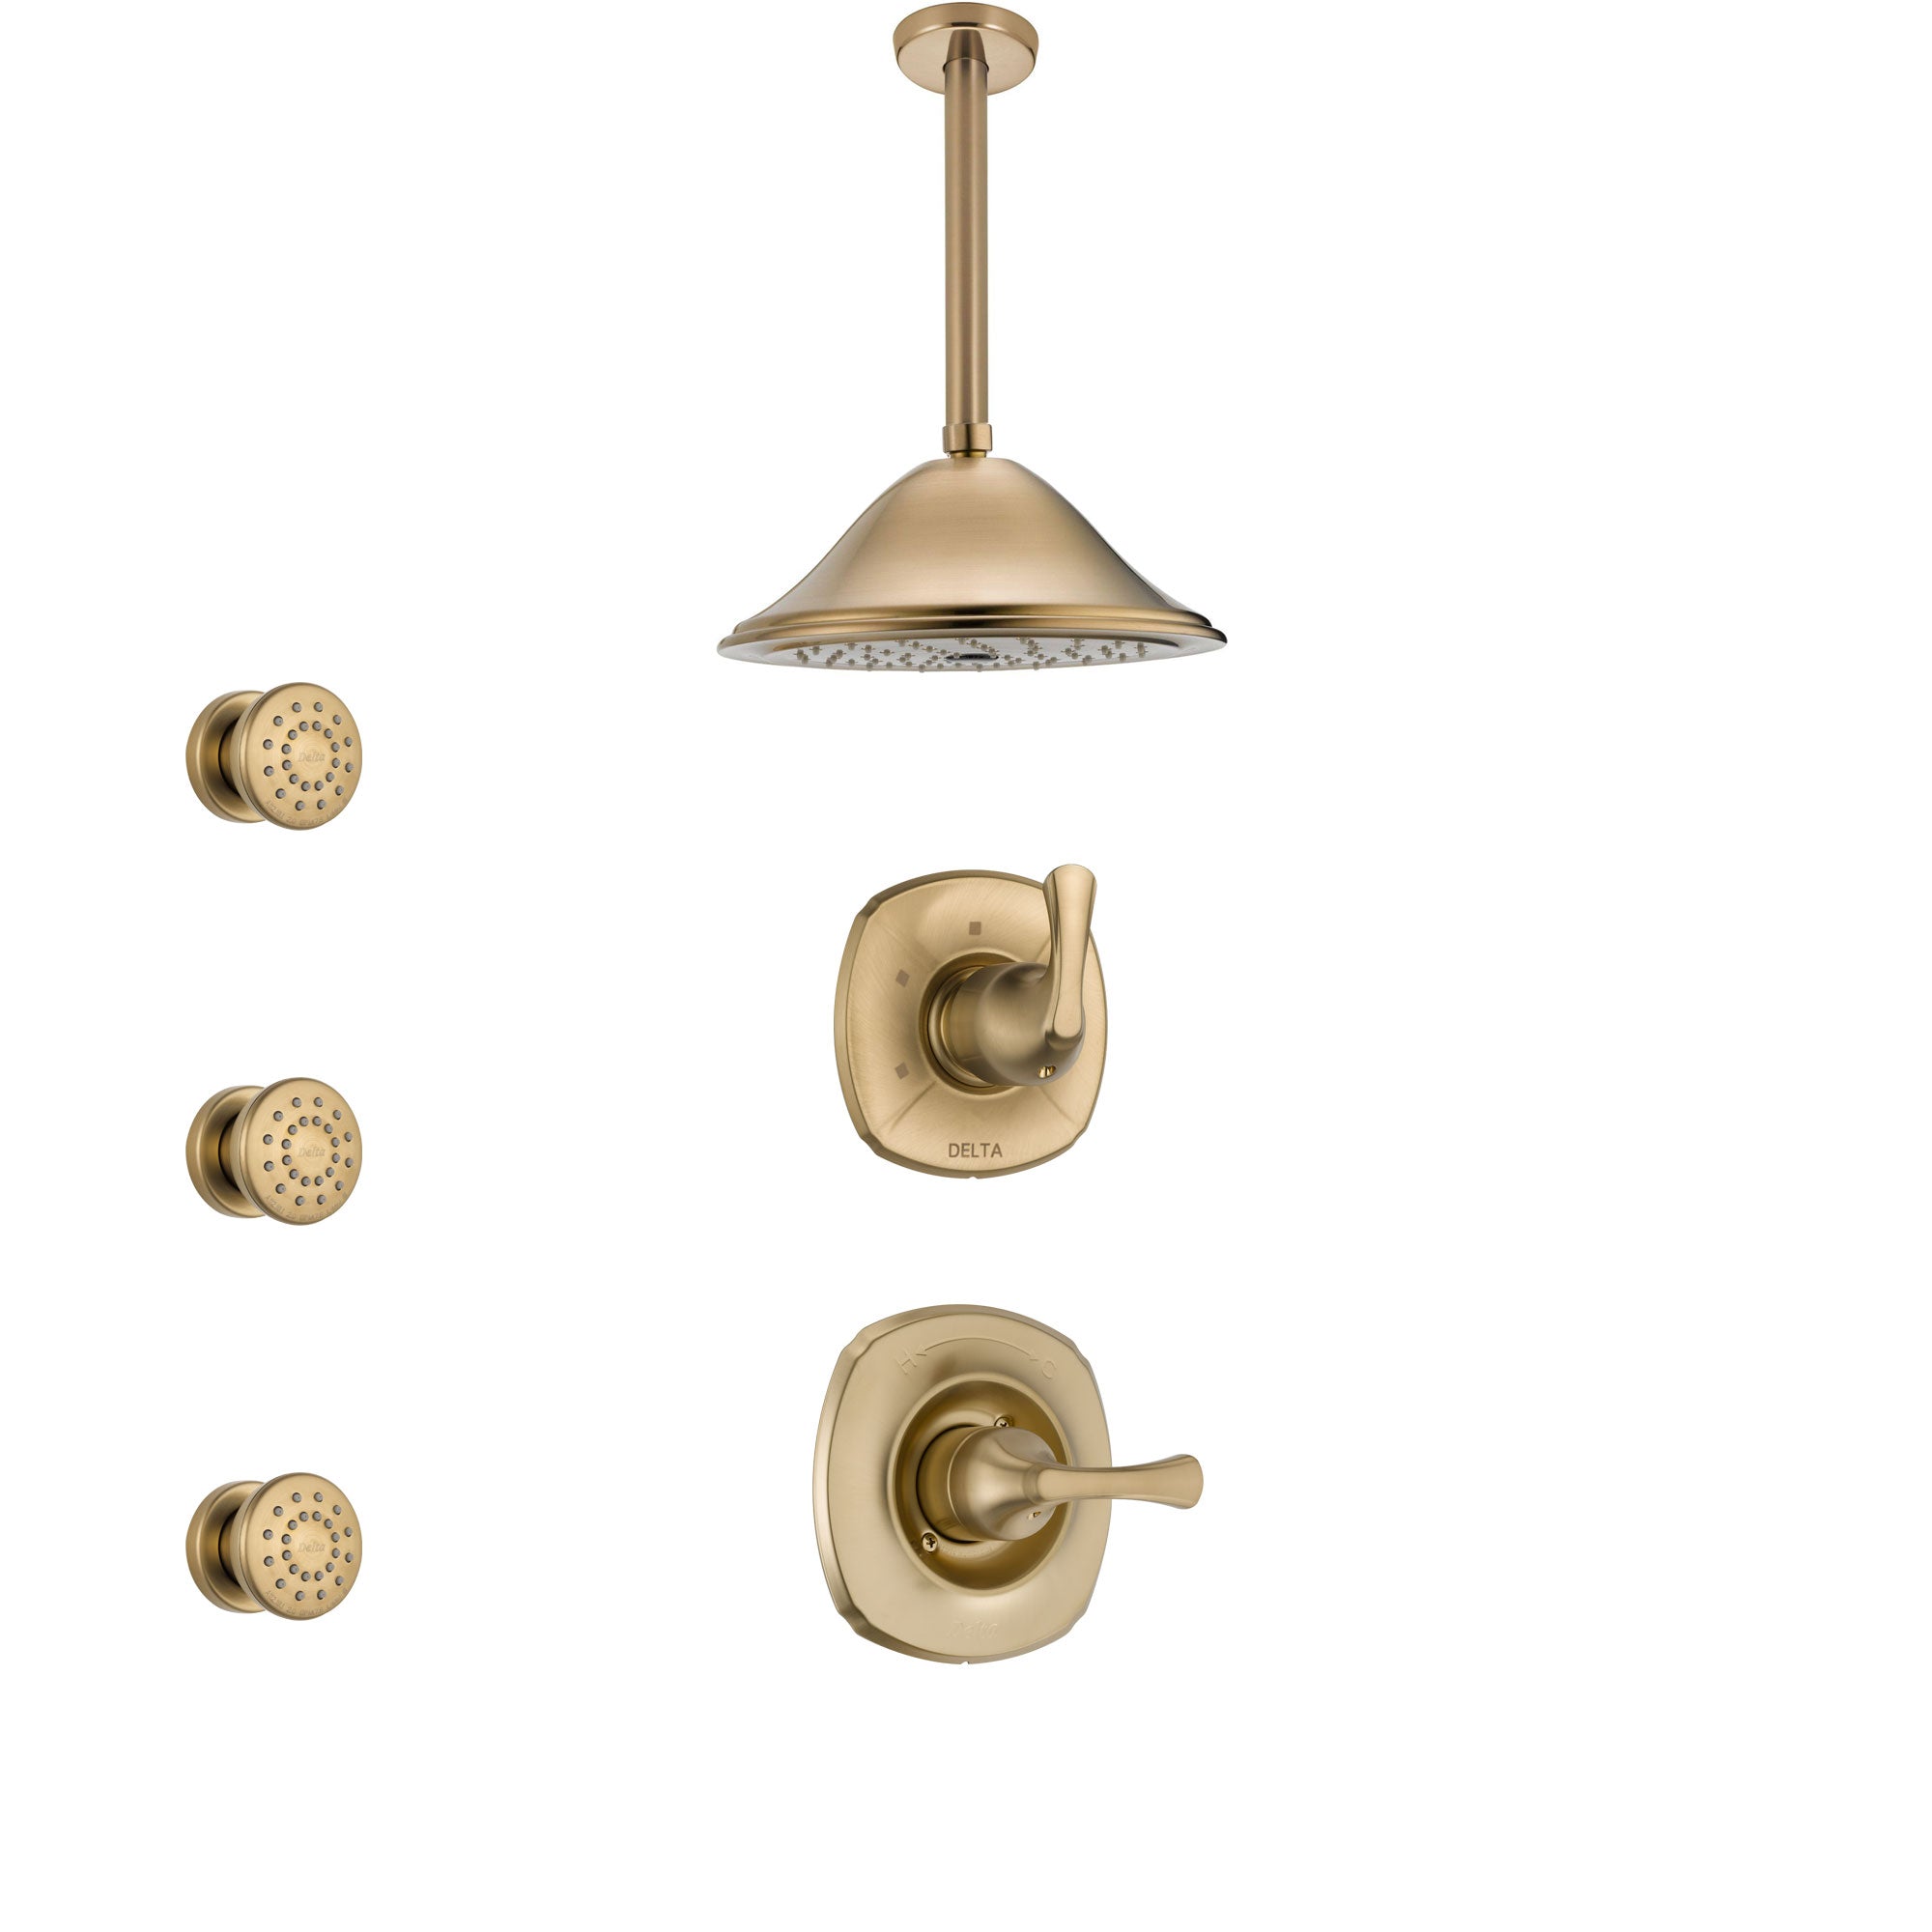 Delta Addison Champagne Bronze Finish Shower System with Control Handle, 3-Setting Diverter, Ceiling Mount Showerhead, and 3 Body Sprays SS1492CZ2